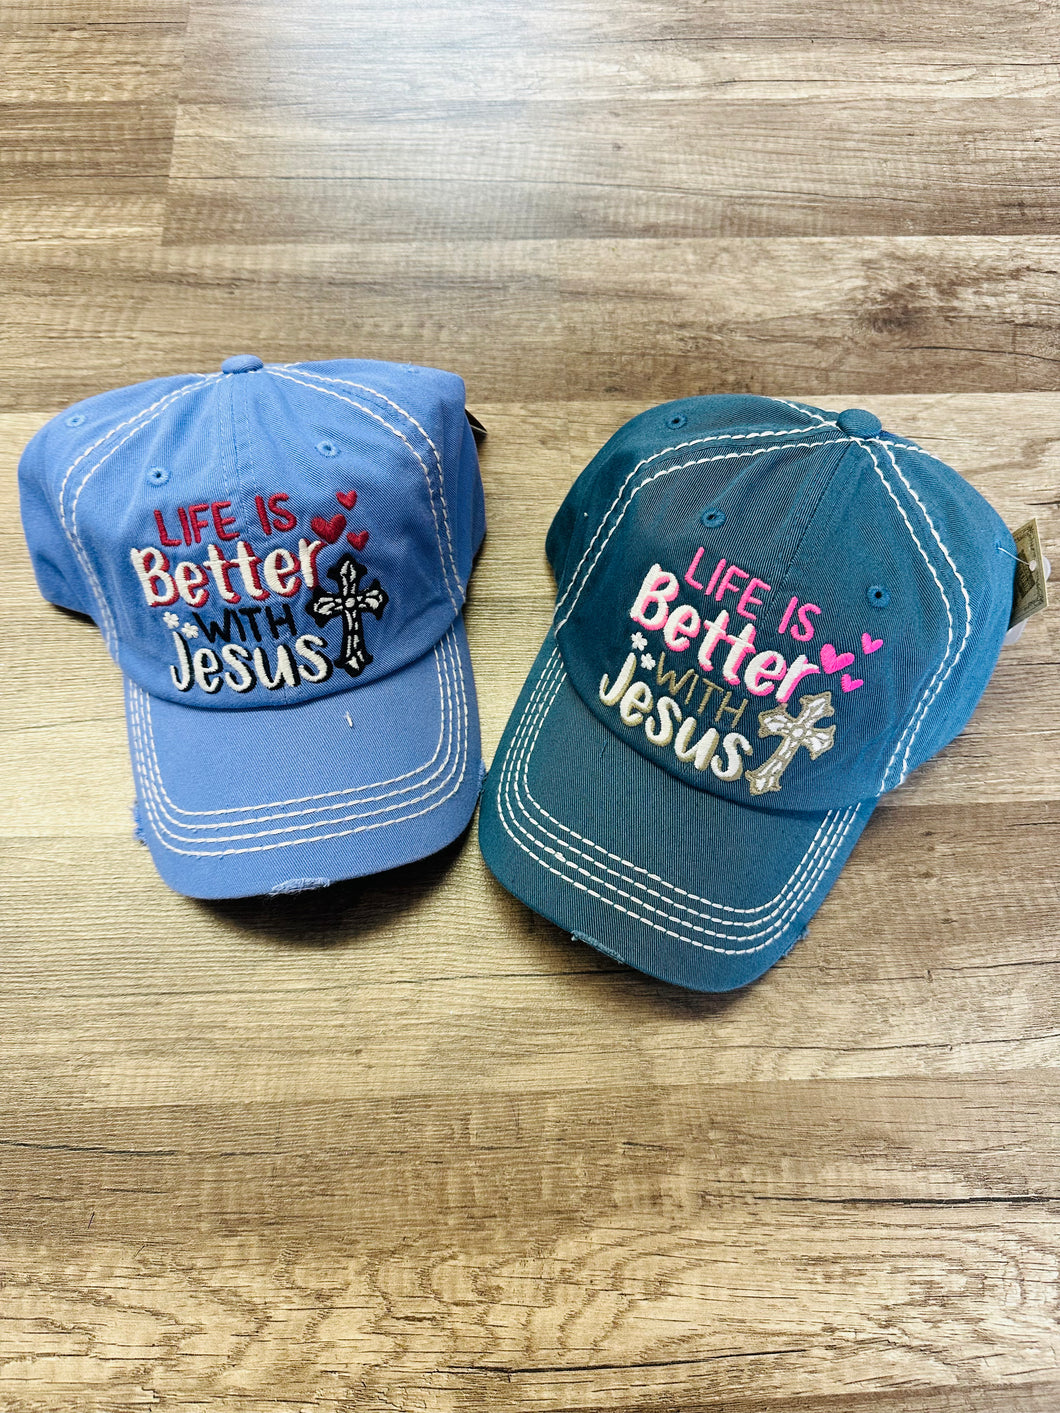 Life is Better with Jesus ballcap